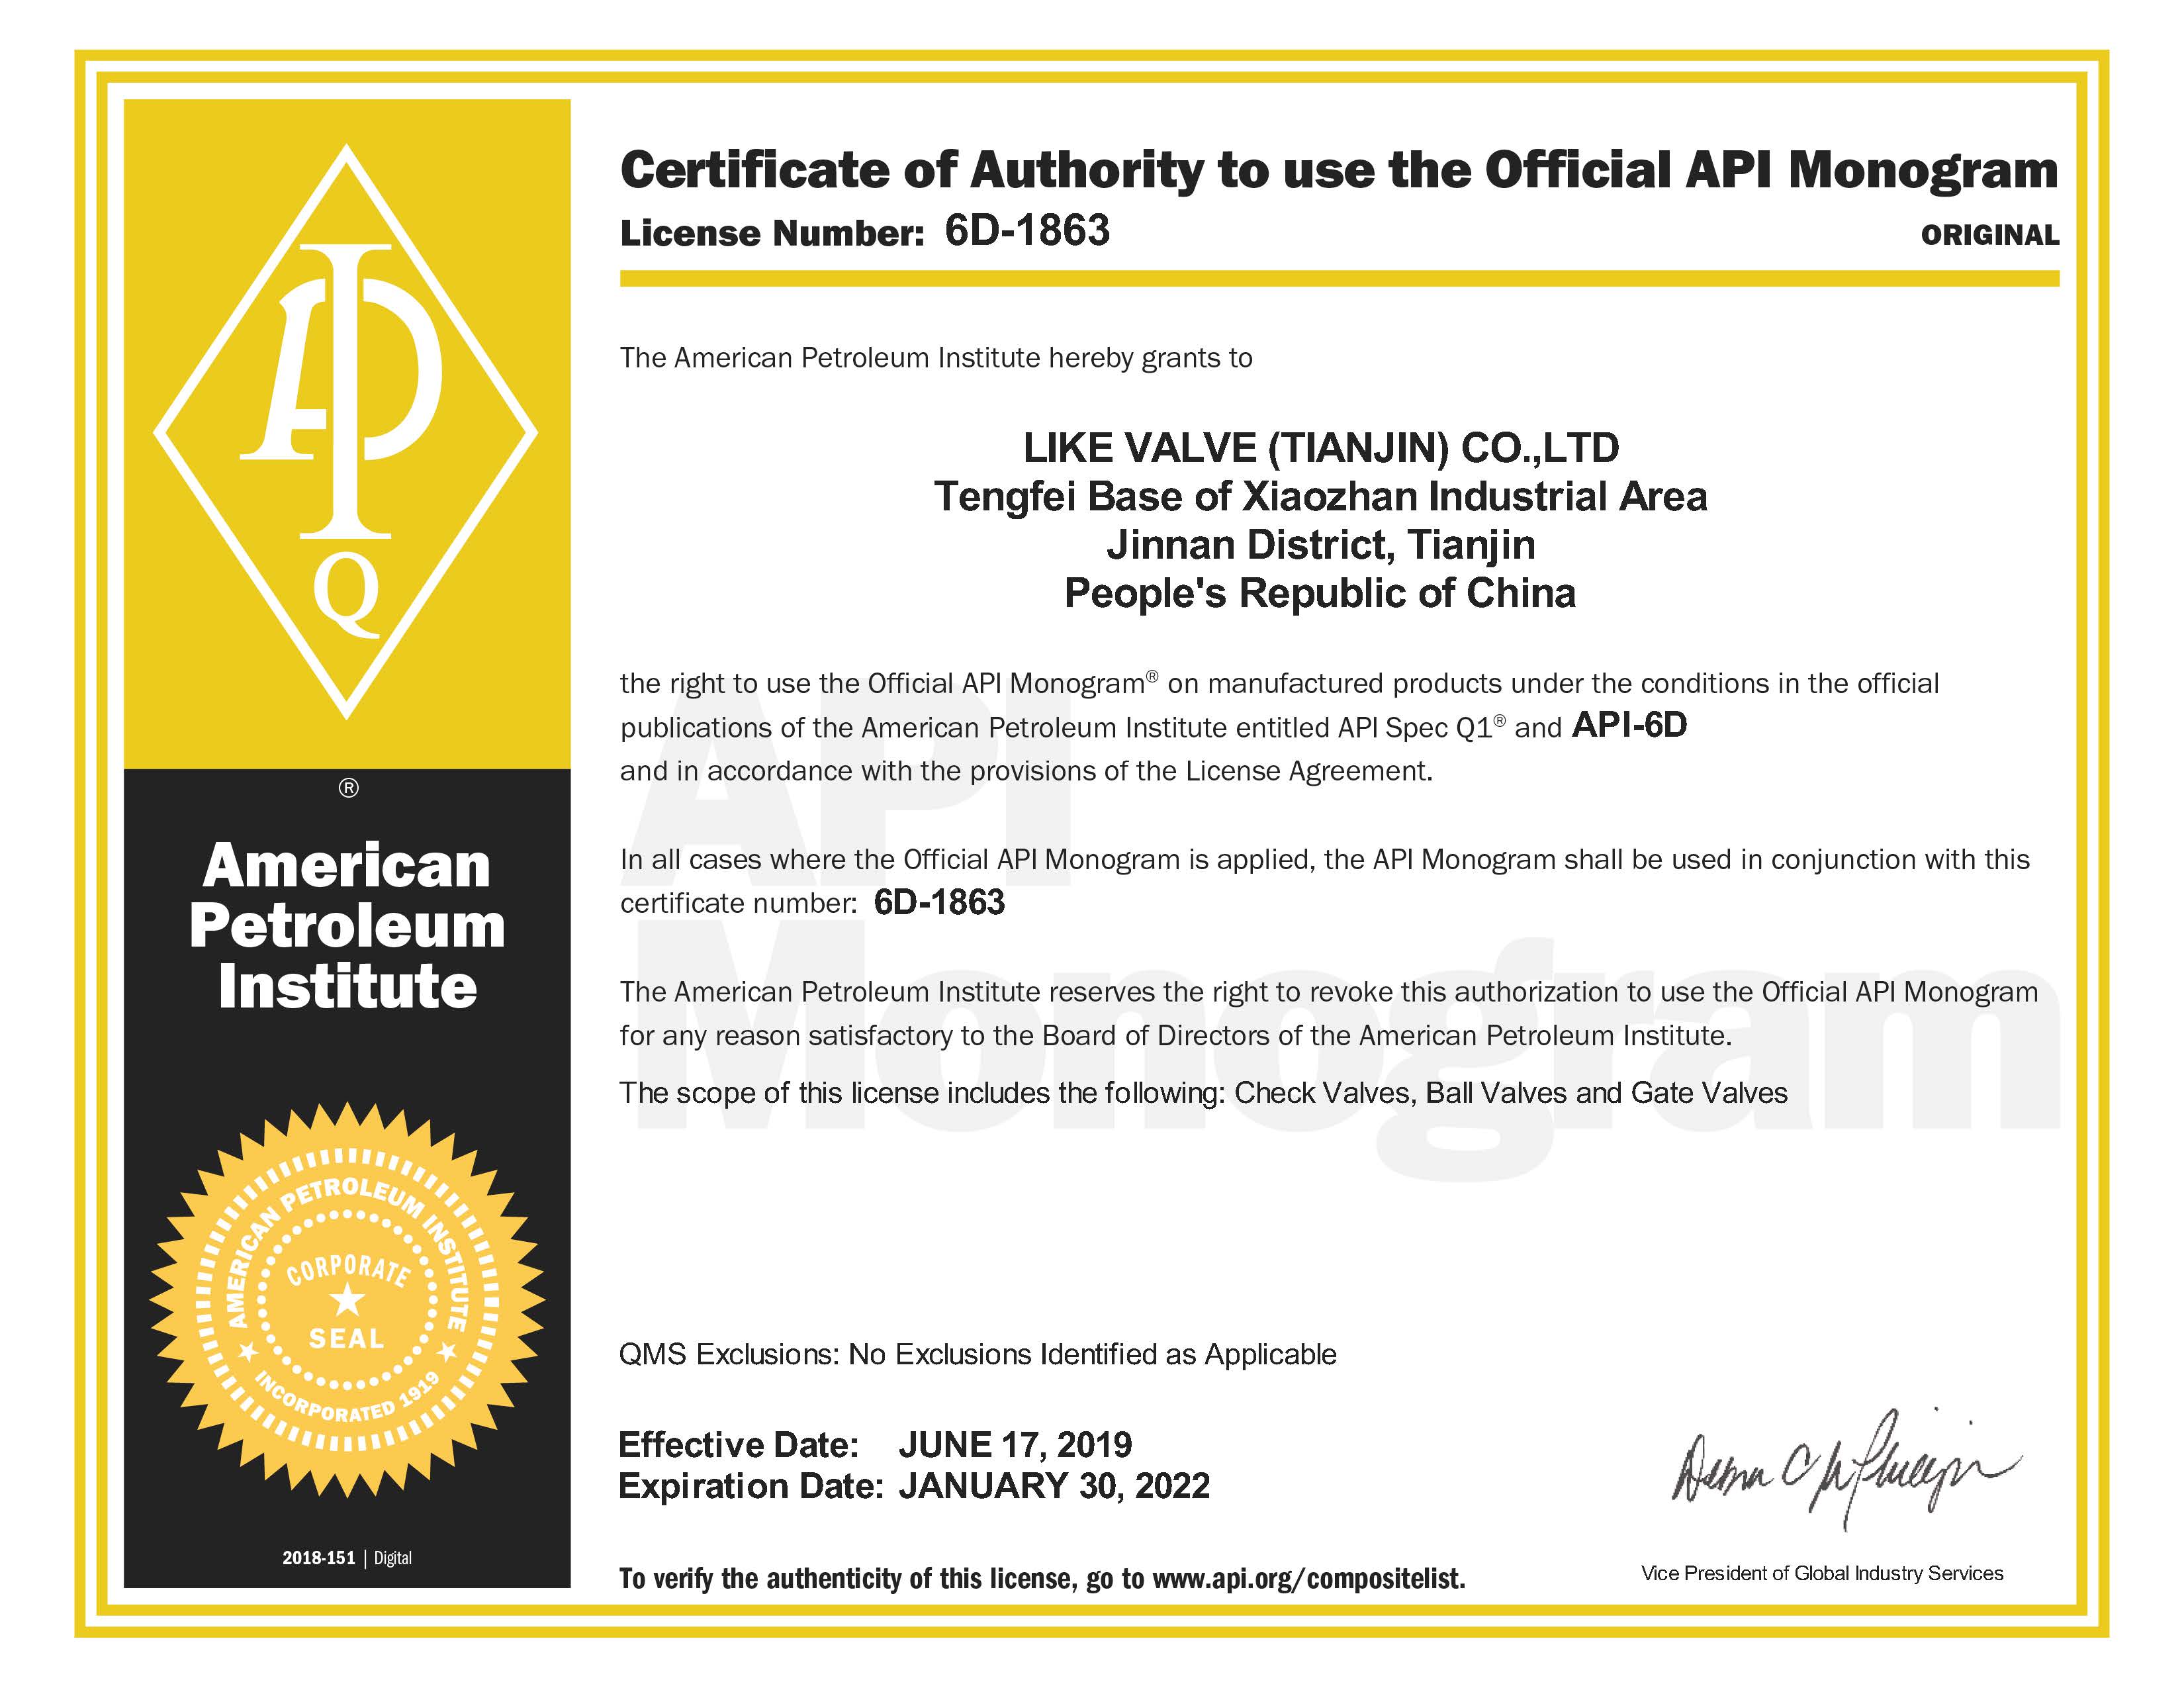 True gold does not fear fire! Like Quality Wins API Certificate from American Petroleum Institute